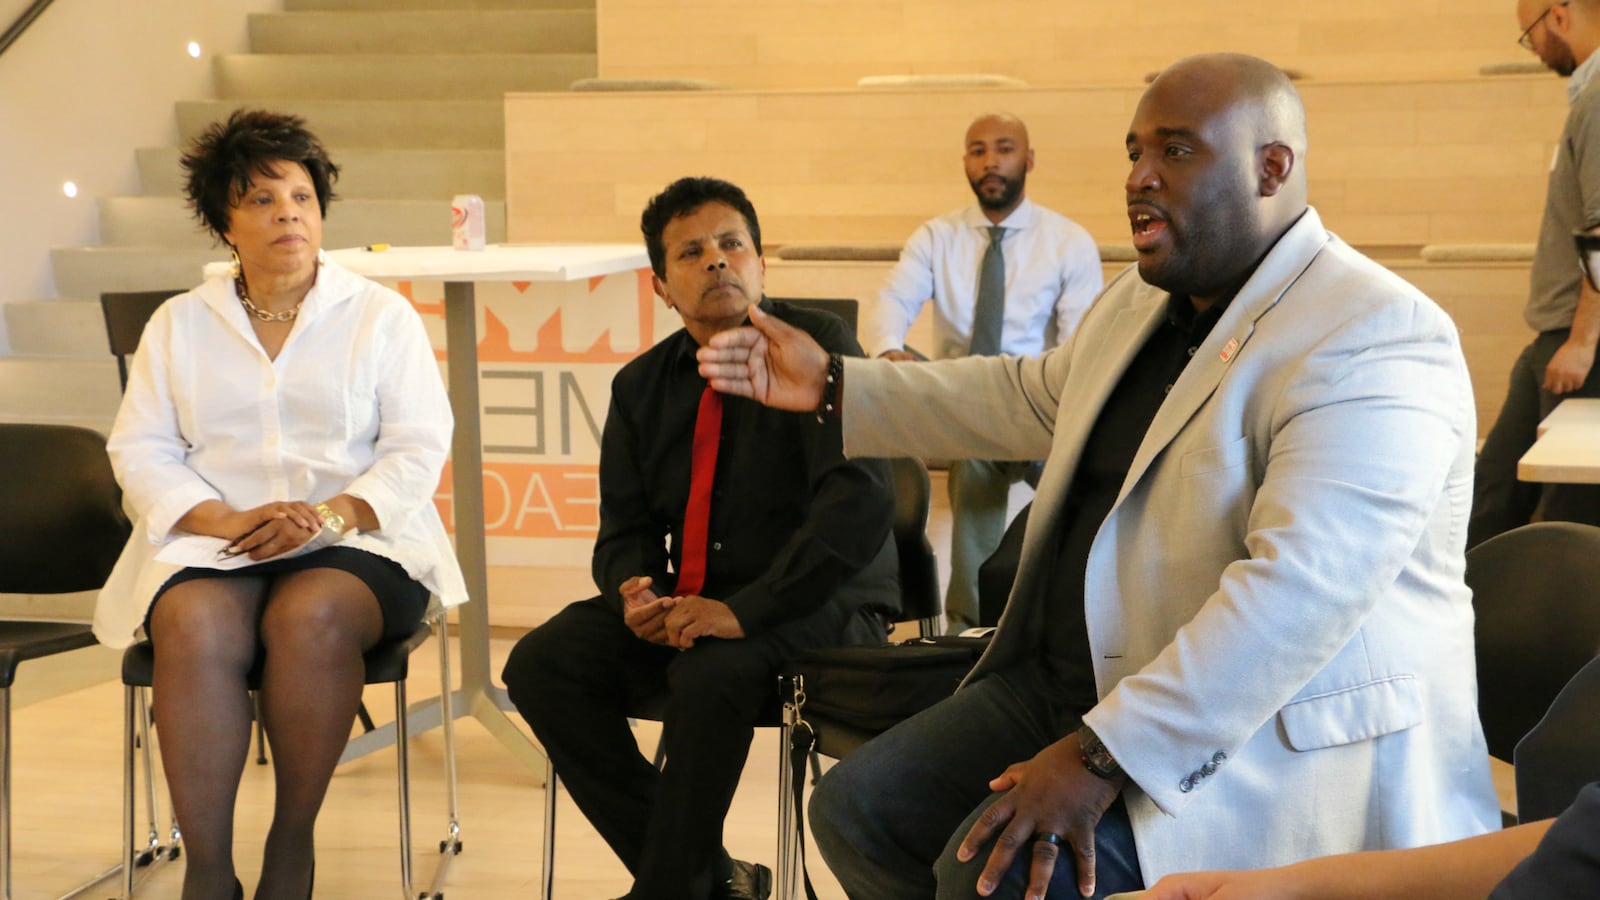 NYC Men Teach, a program to recruit male teachers of color, hosted a discussion between prospective teachers and retired principals in June 2016.